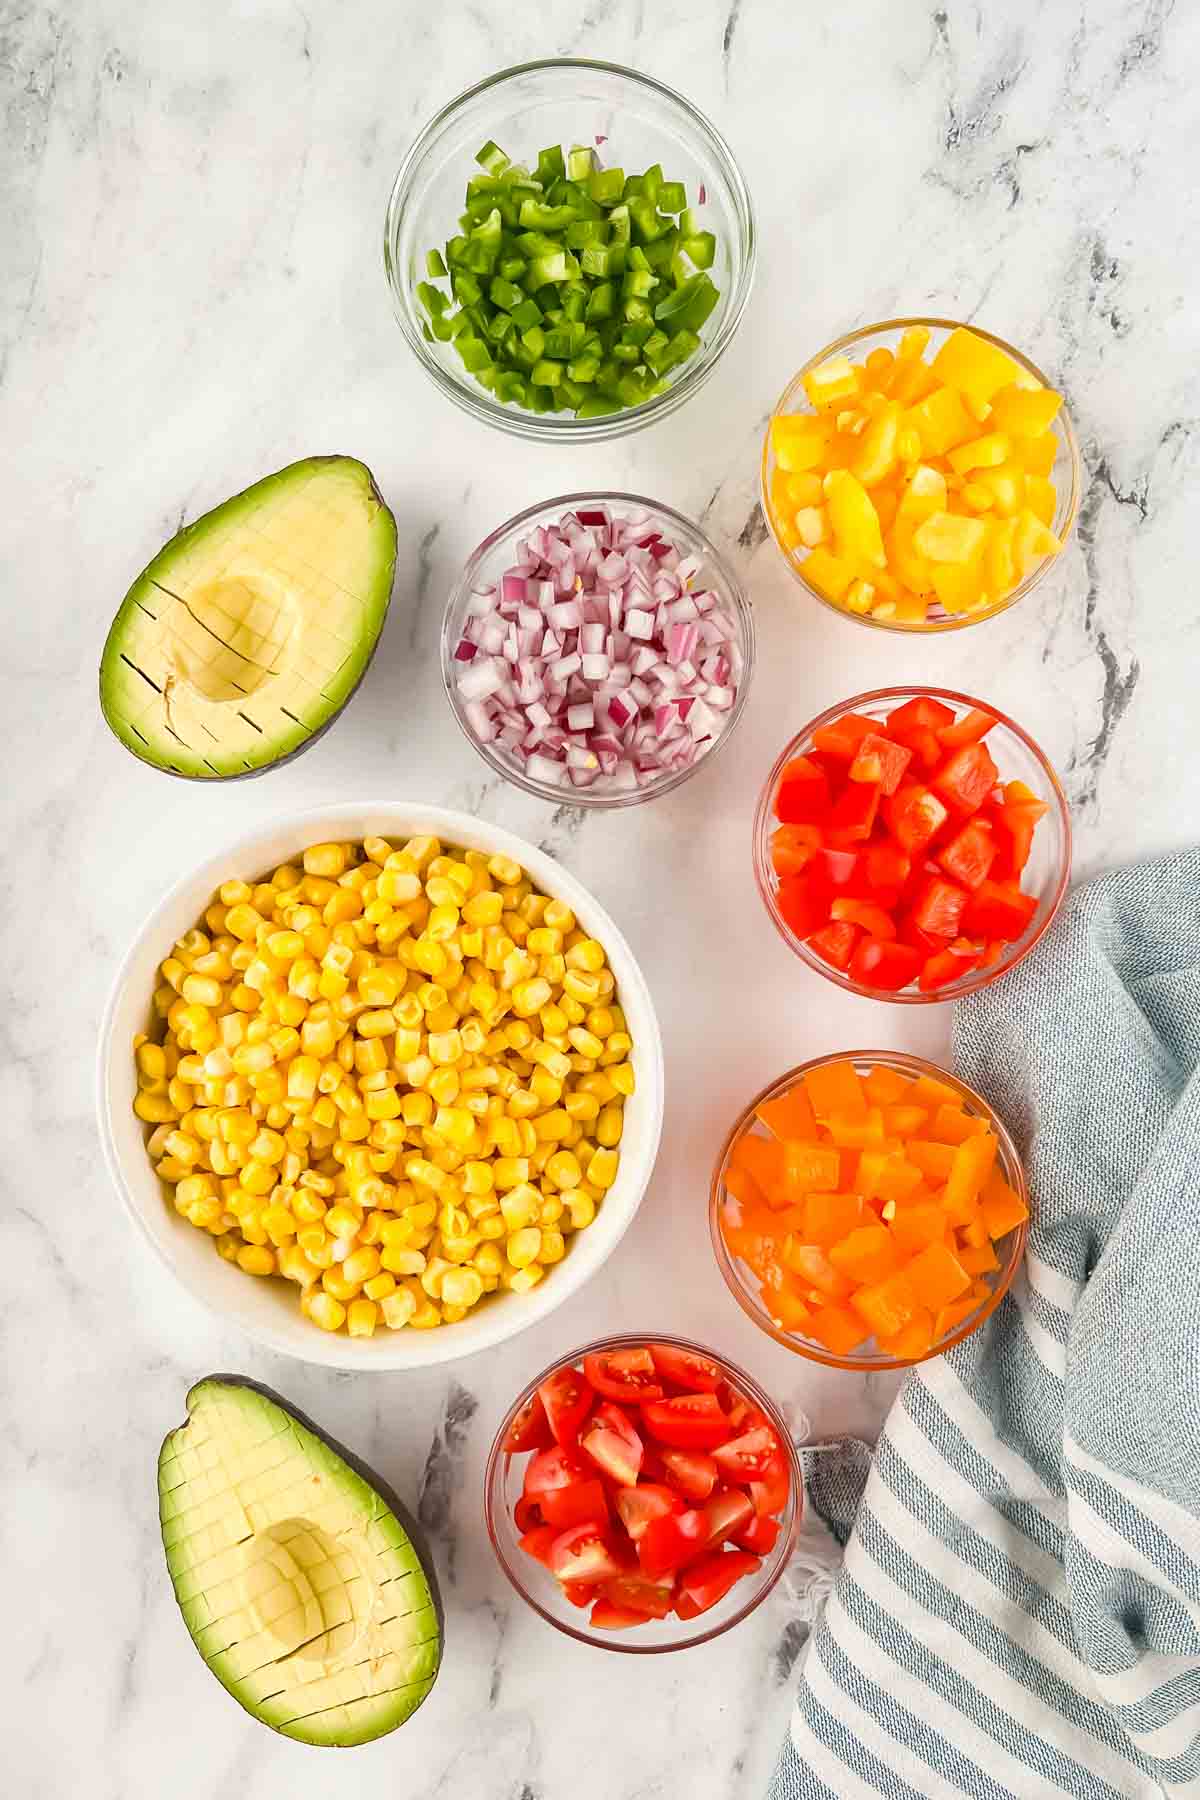 Diced peppers, onion, tomato, corn, and avocado in individual bowls on white marble background